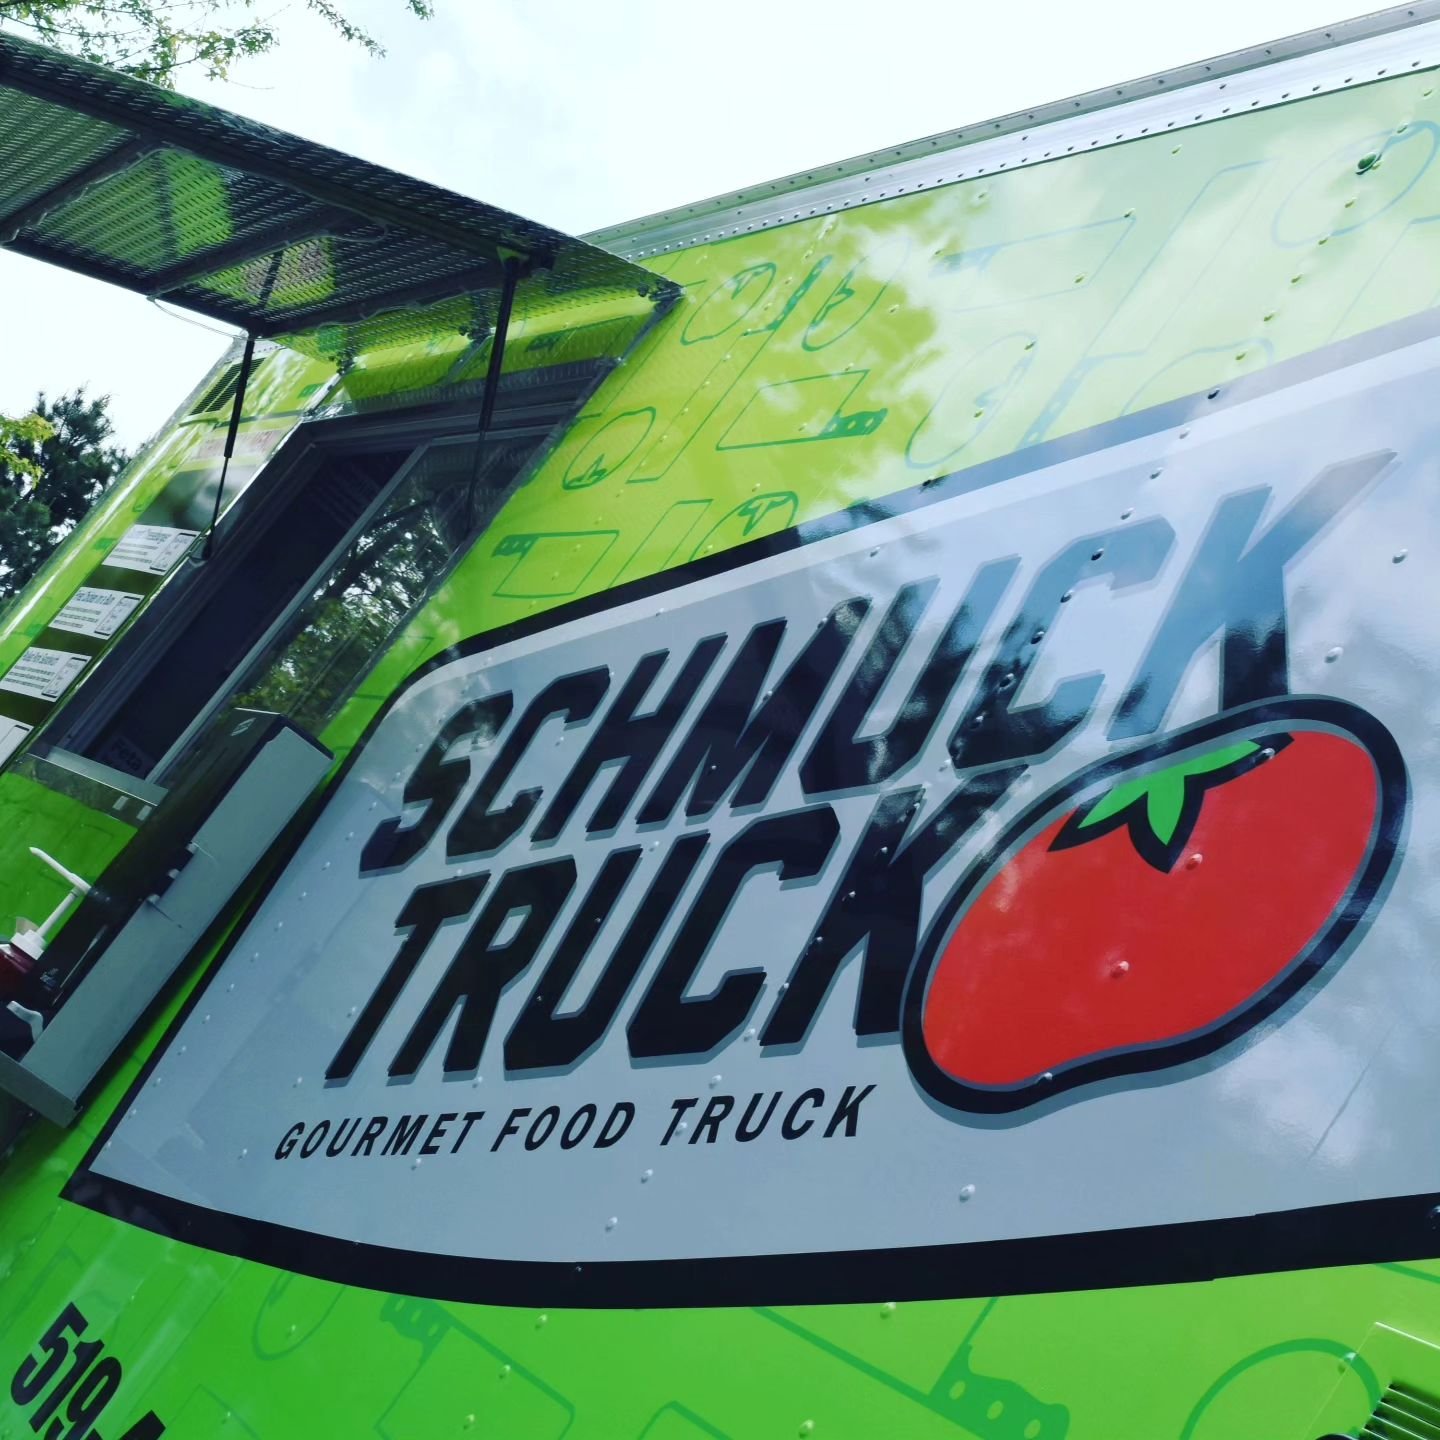 WINDOW OPENS THIS FRIDAY!!!!

🗓 Friday May 3rd
⛪️ Elmira Mennonite Church
📍 58 Church St W, Elmira
⏰️ 430pm-8pm 

Our FIRST public service of 2024! We are pumped to see your faces again 😀 

What are you craving the most??? Let us know in the comme